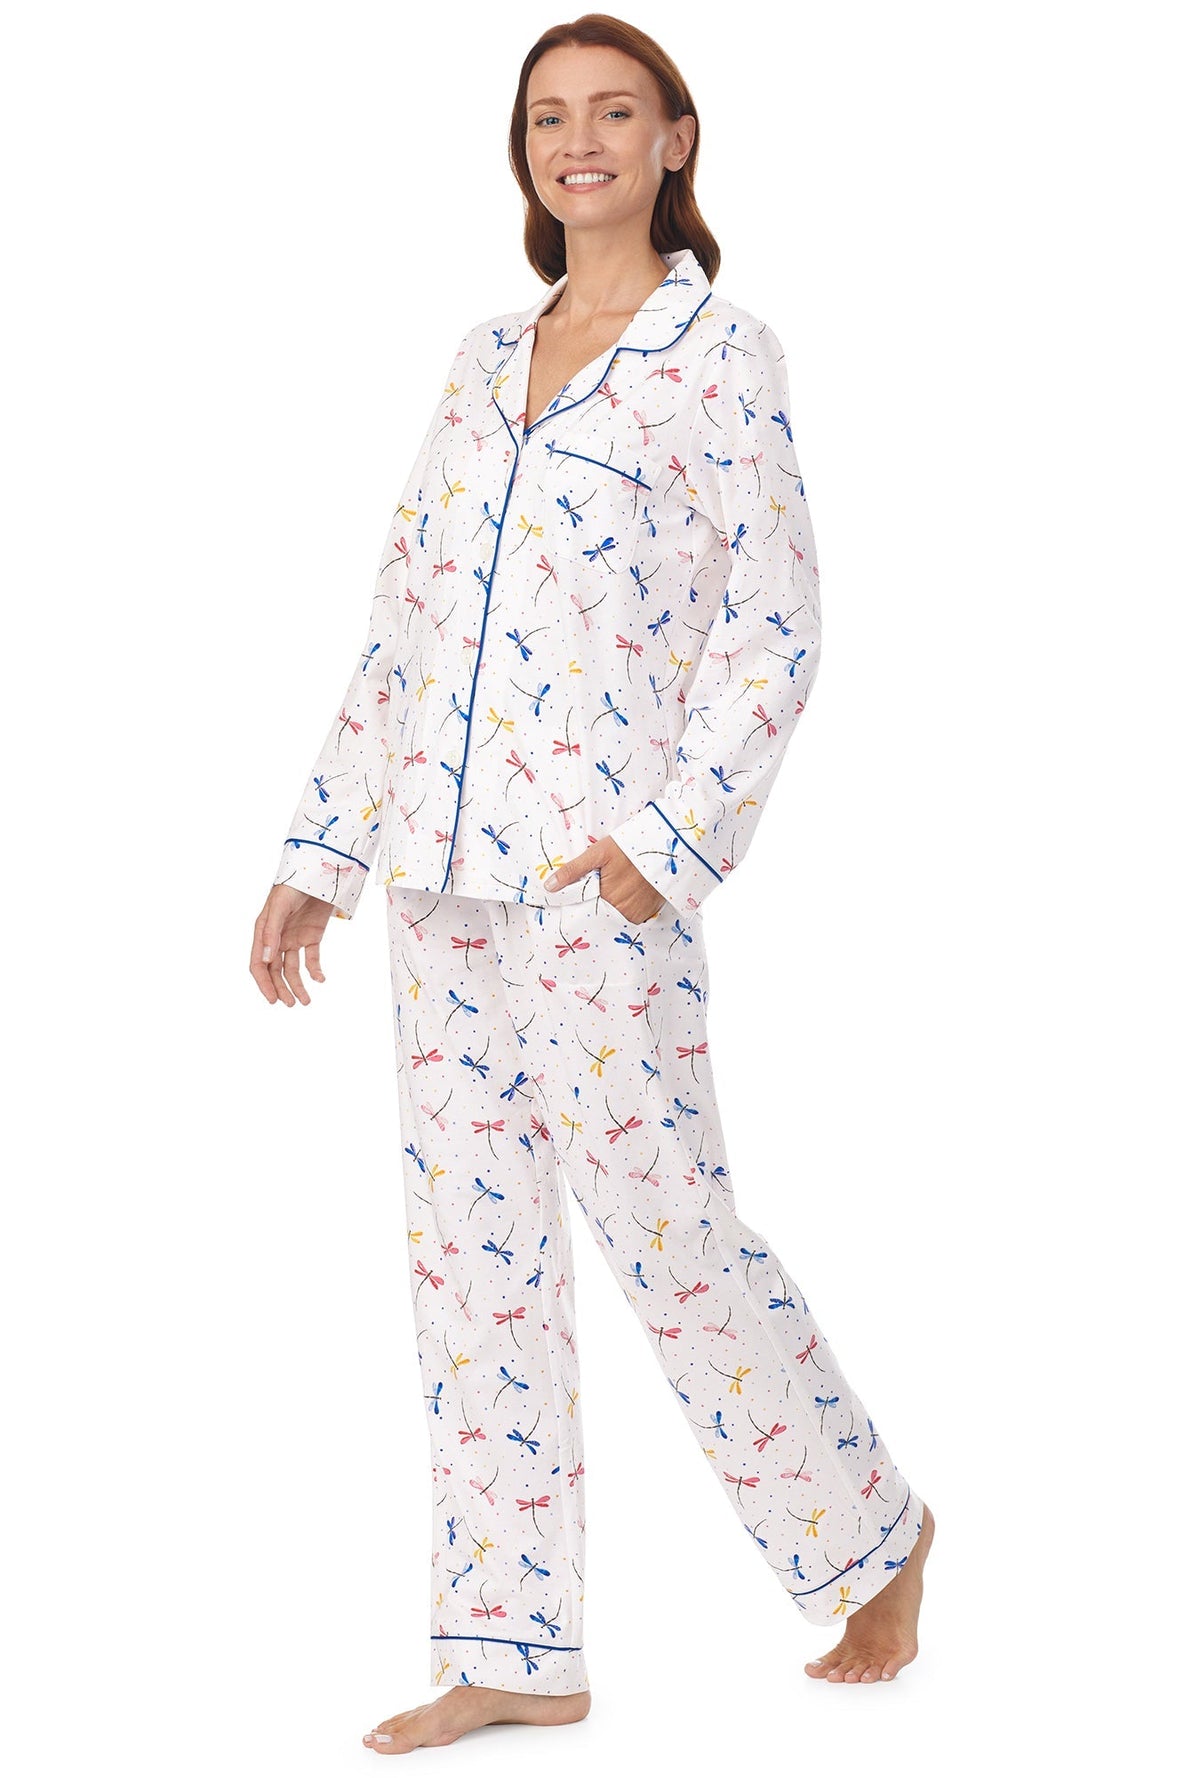 A lady wearing a white long sleeve pj set with dragonfly pattern.